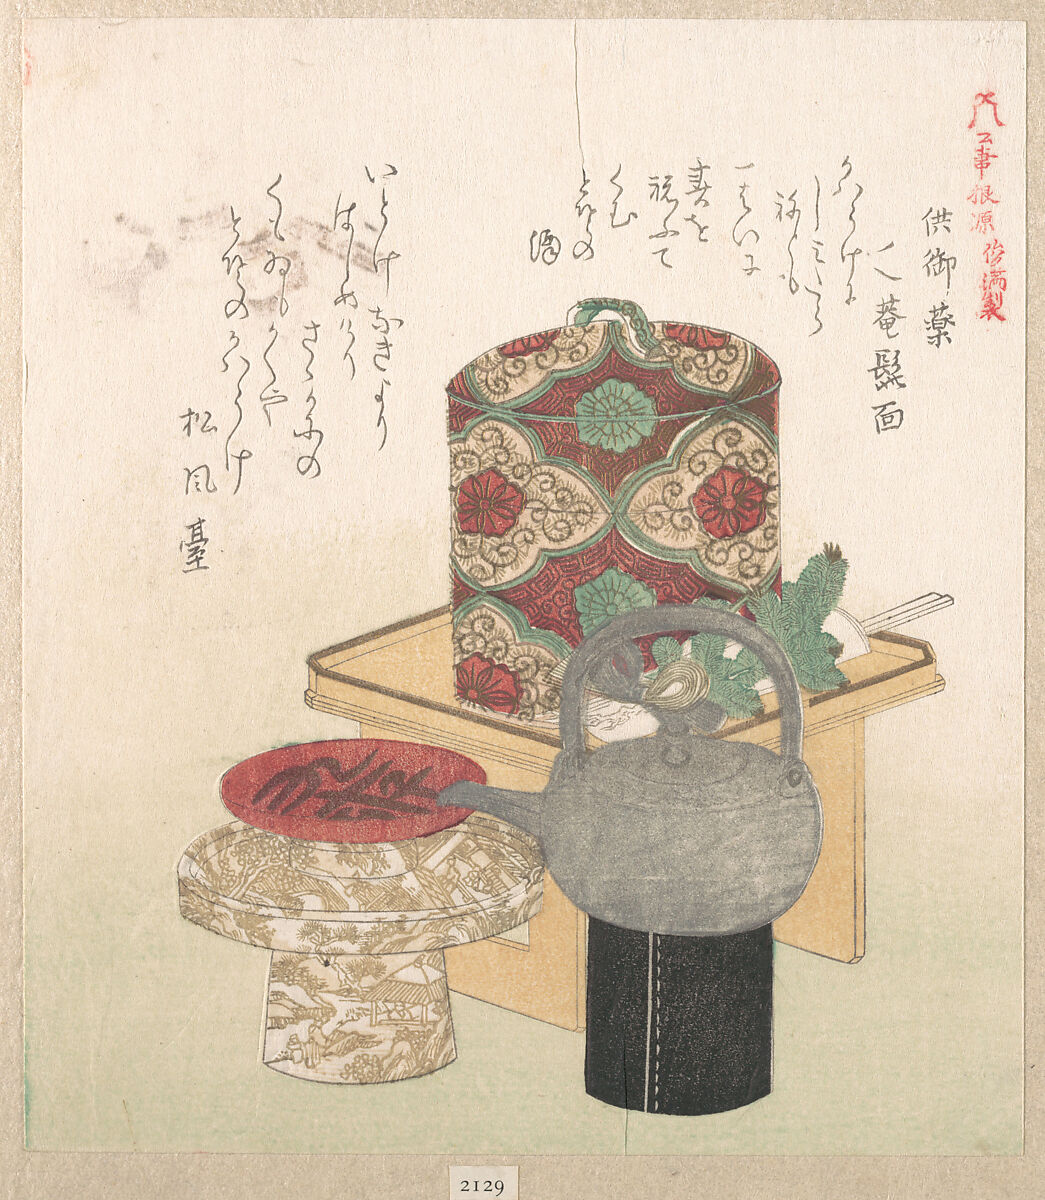 Wine-Set for the New Year Ceremony, Kubo Shunman (Japanese, 1757–1820) (?), Woodblock print (surimono); ink and color on paper, Japan 